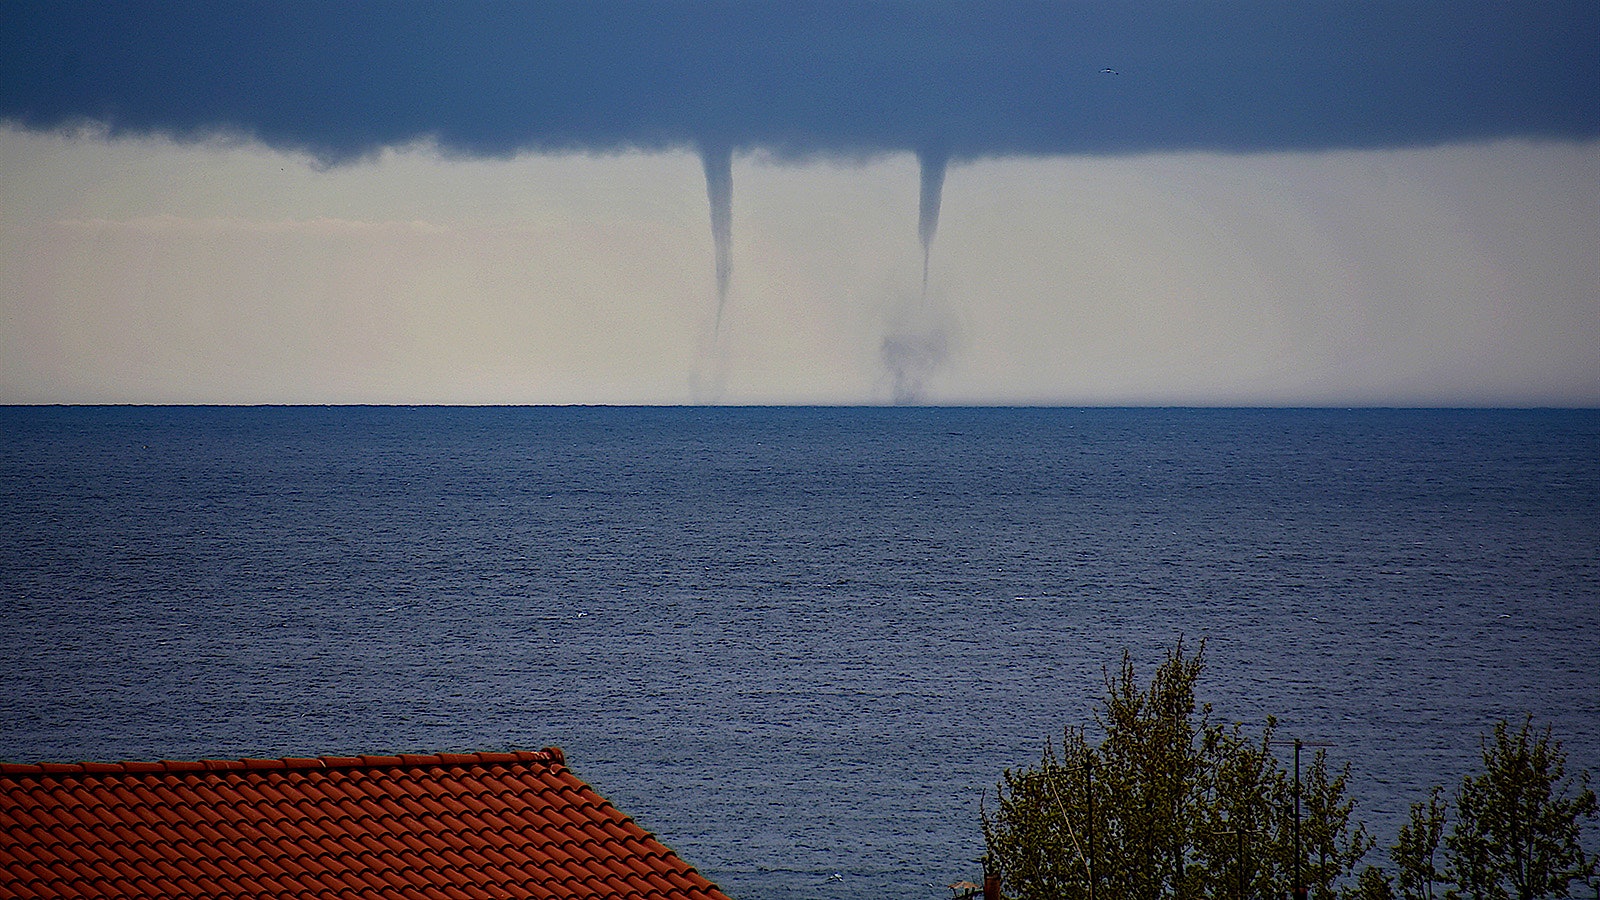  A wide, ominous, dark storm cloud and two waterspouts off the coast of Marseille